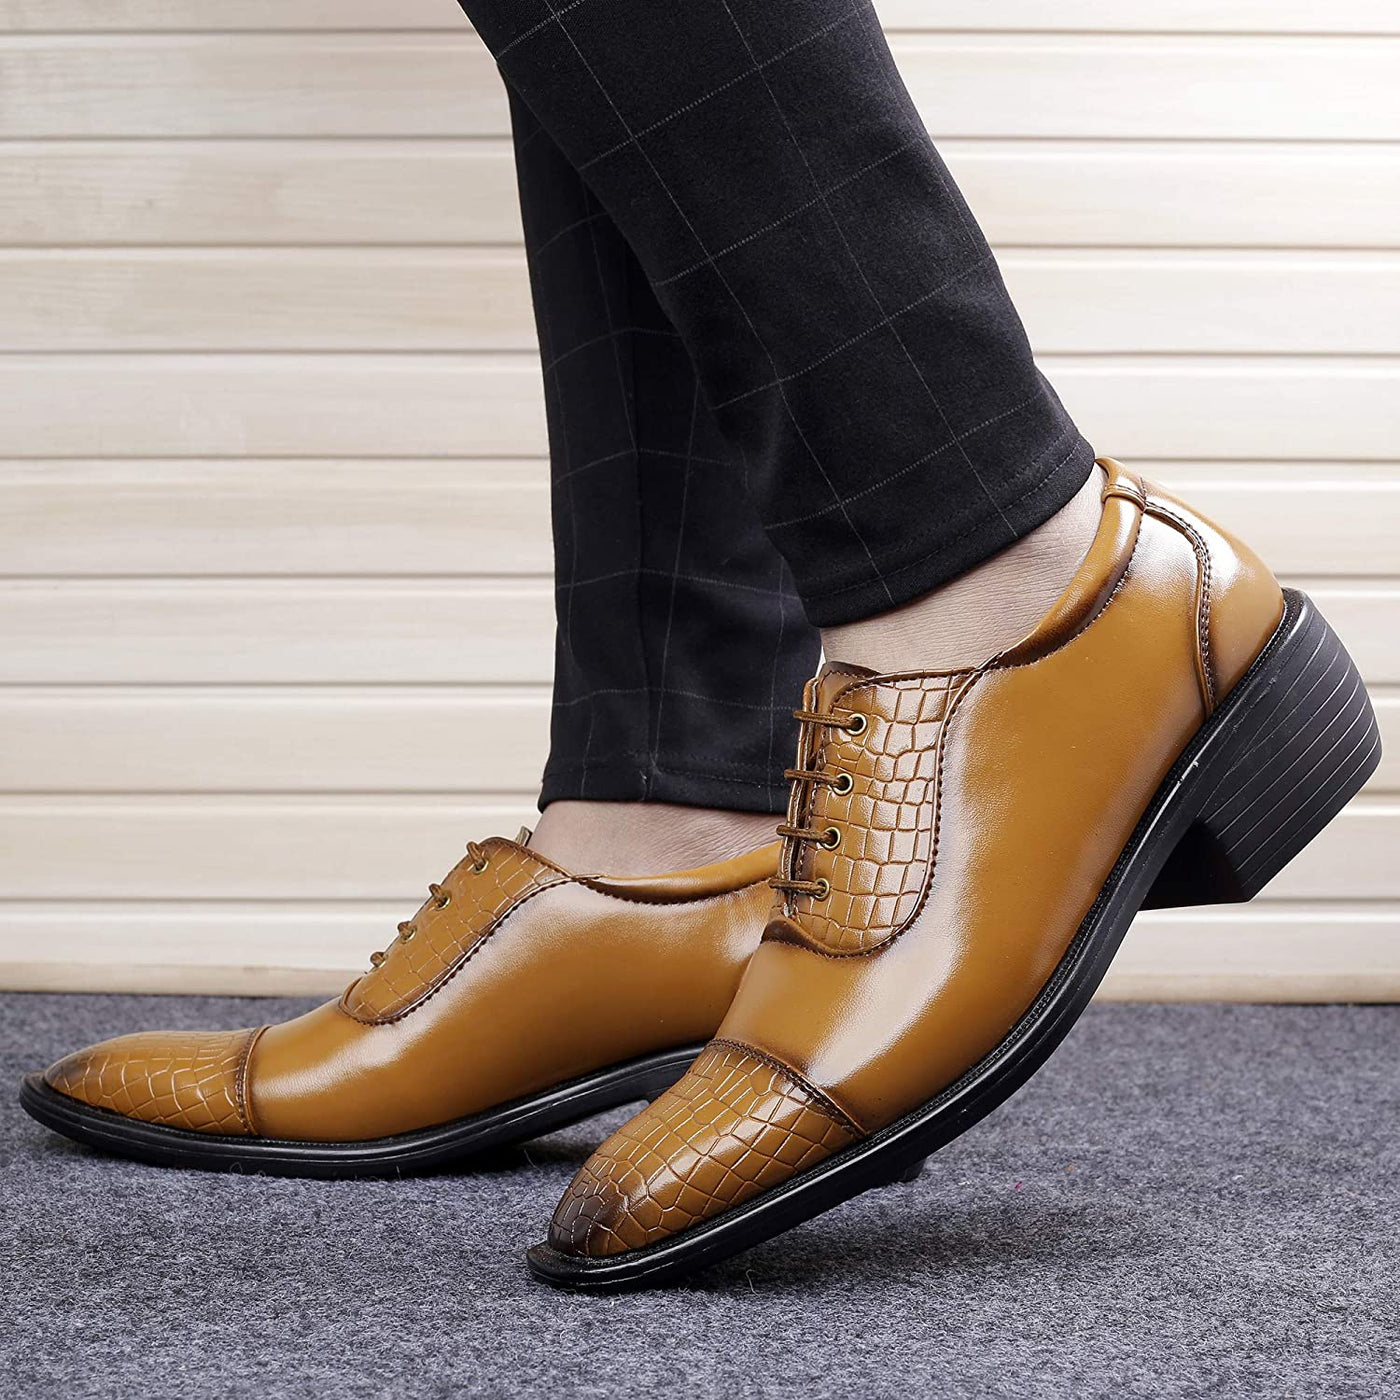 Stylish Tan Formal and Casual Wear Lace-Up Shoes With Height Increasing Heel-Unique and Classy